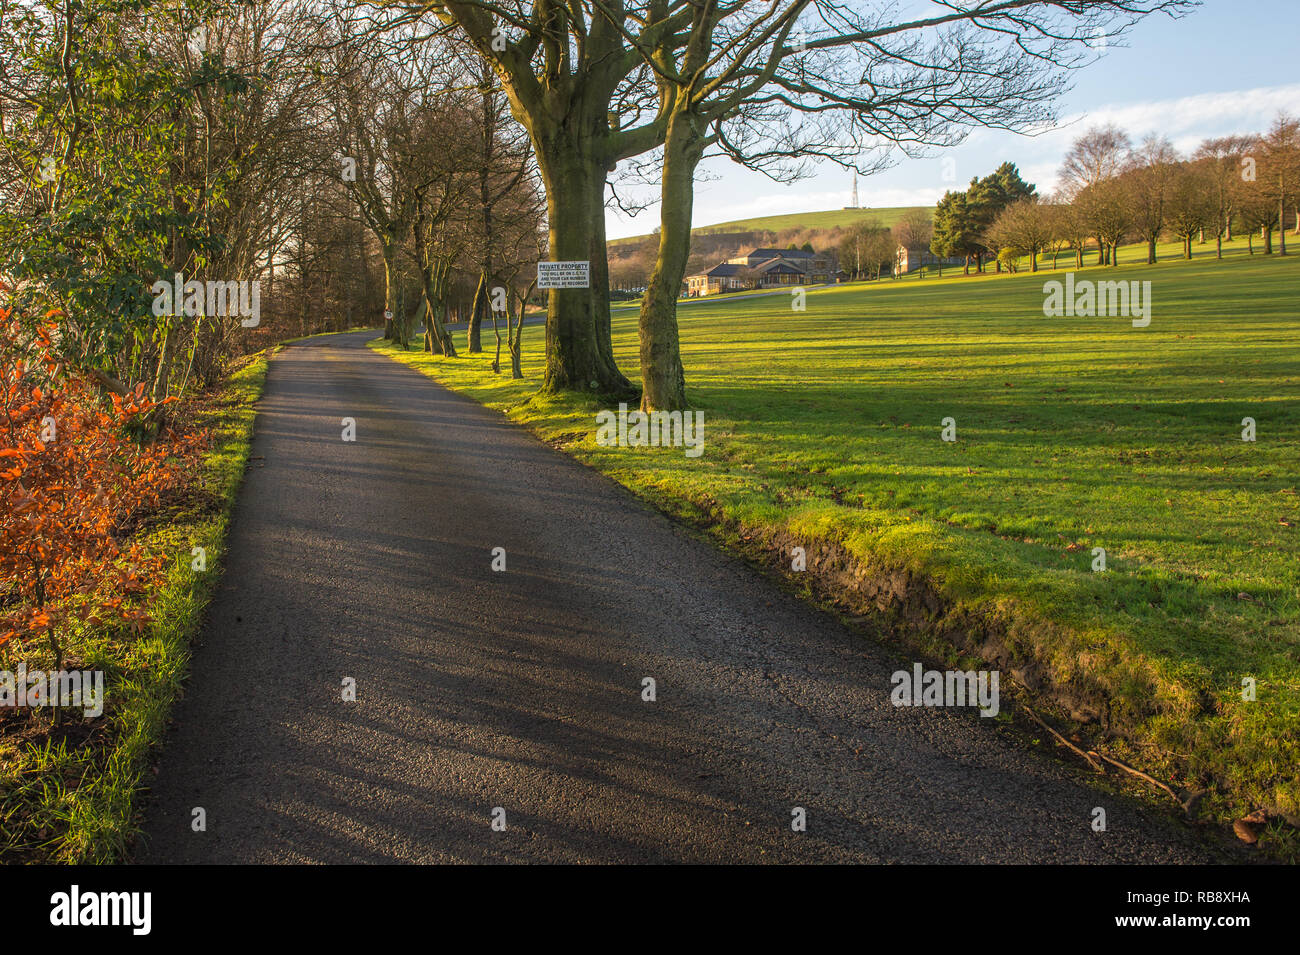 A general view of Saddleworth Golf Club, Uppermill, Greater Manchester on the morning of 8th January 2019. Stock Photo